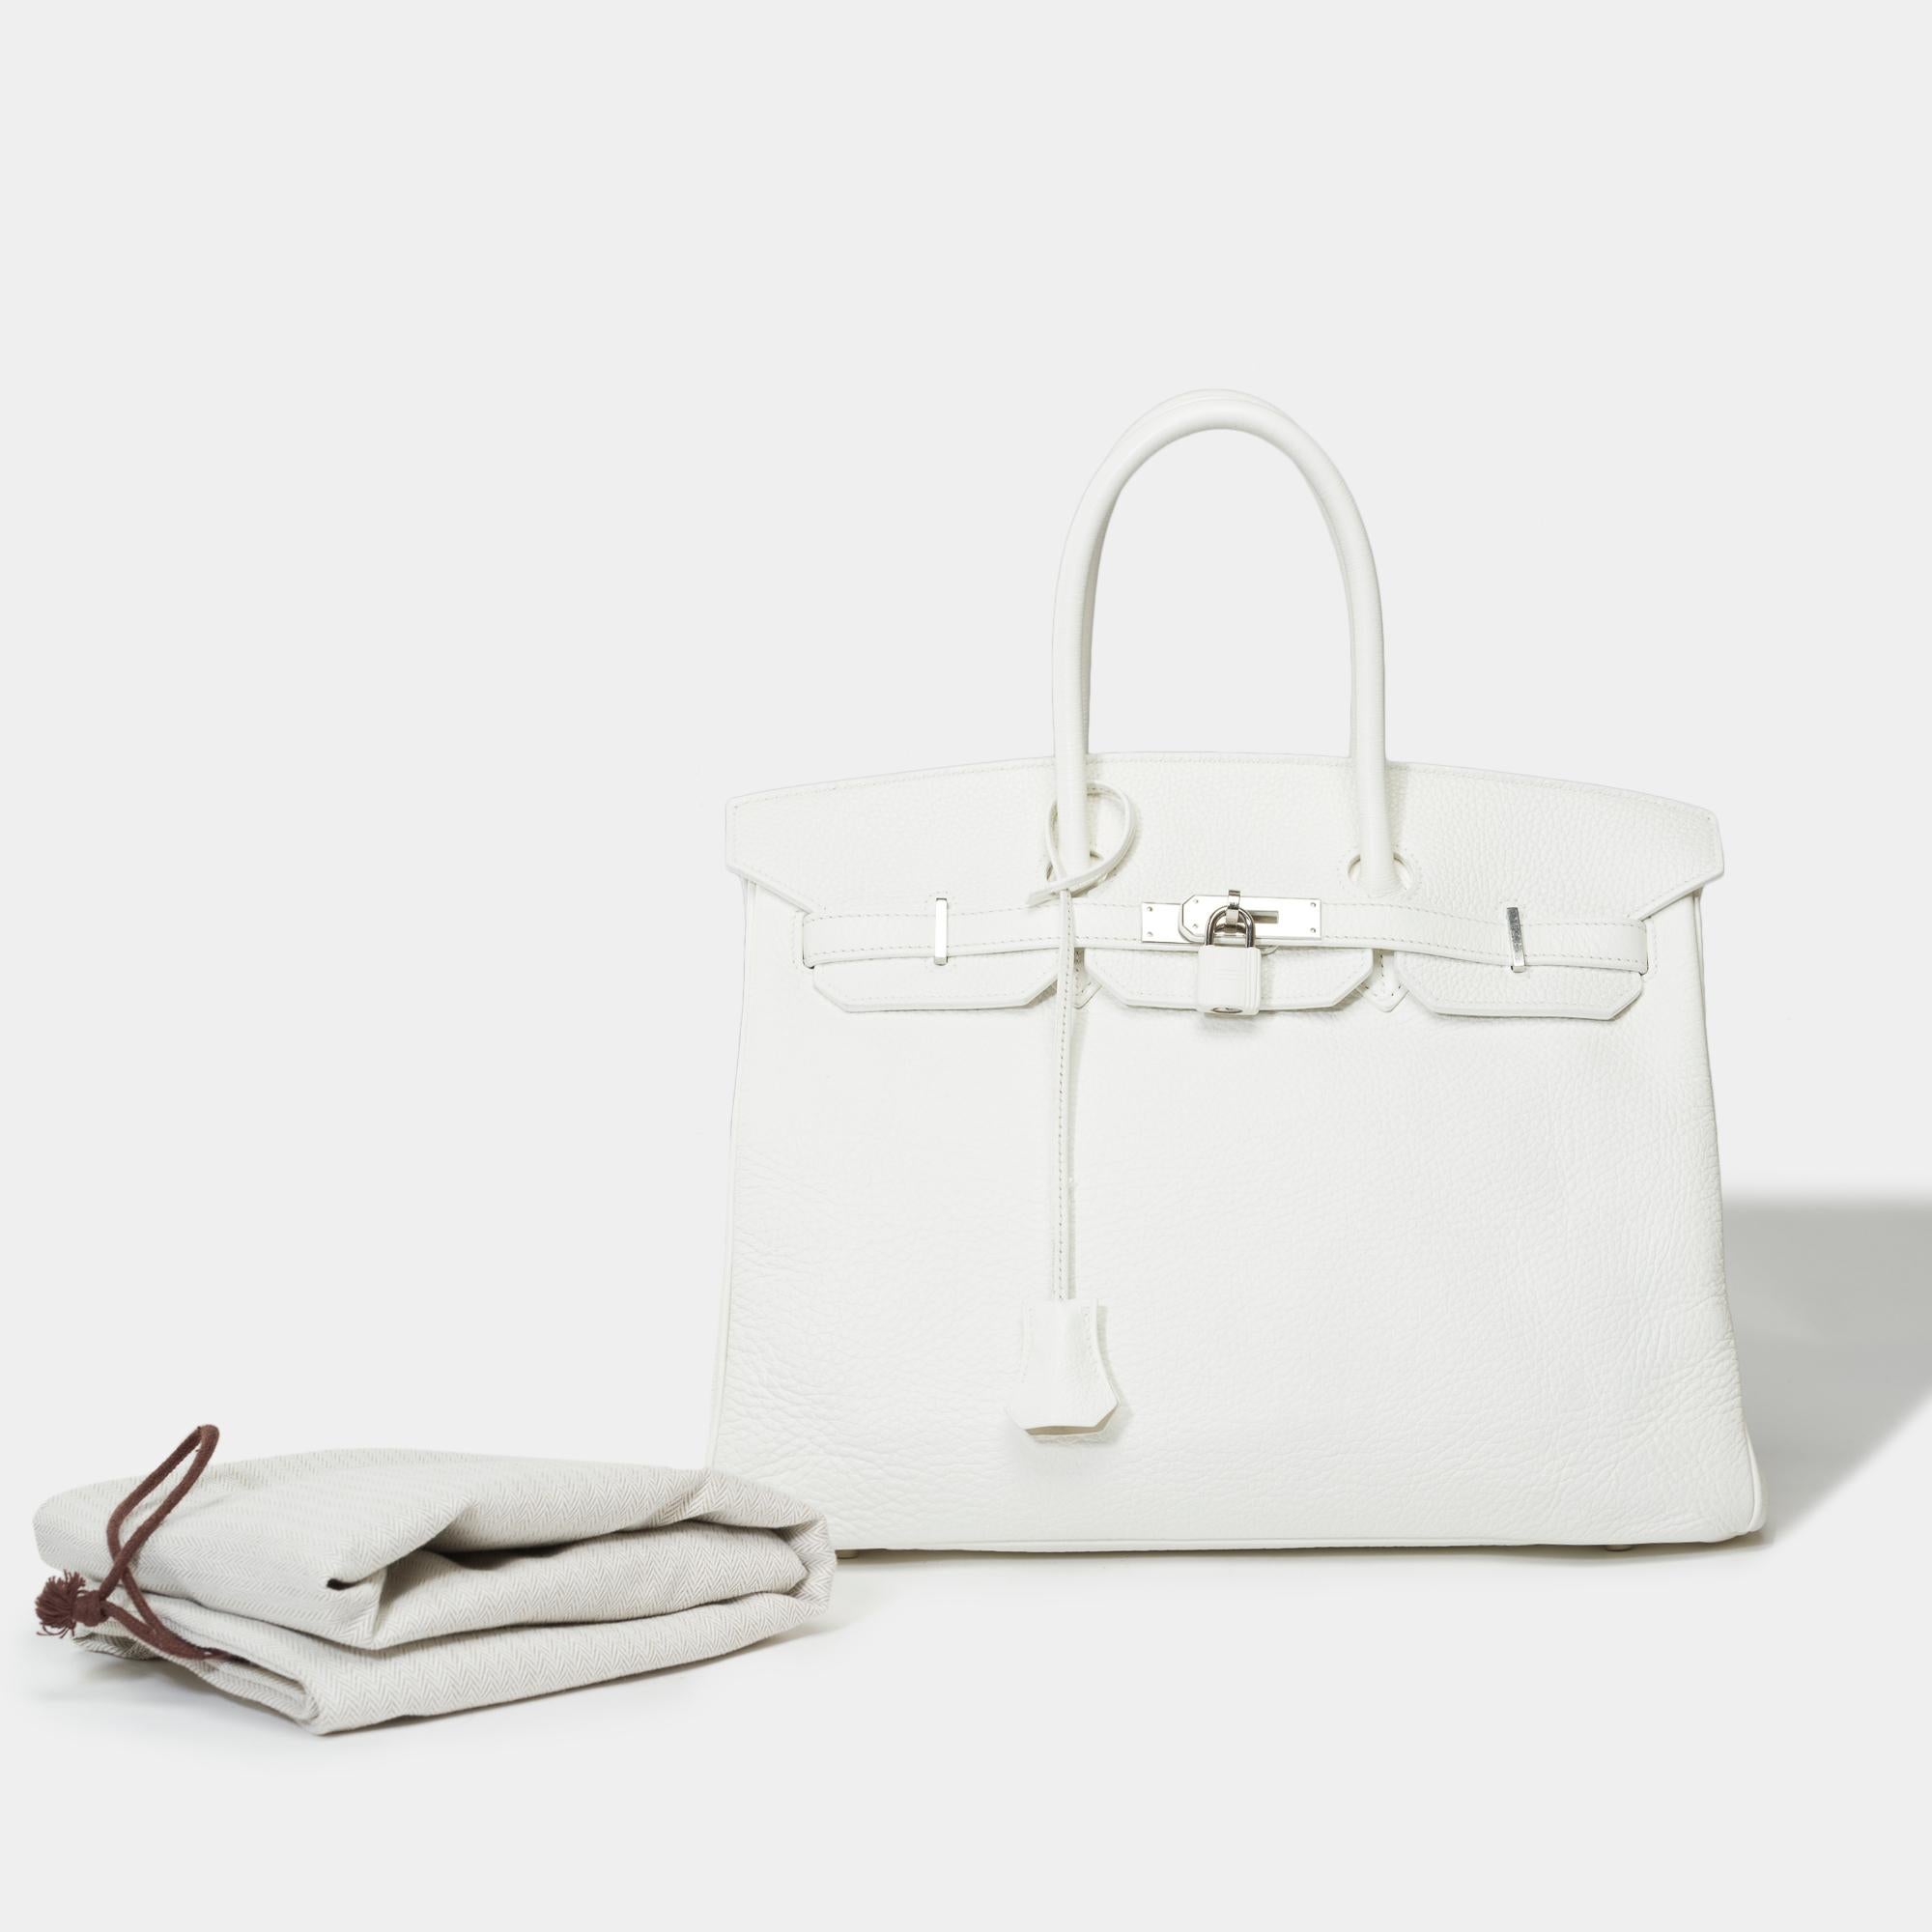 Stunning​ ​Hermes​ ​Birkin​ ​35​ ​handbag​ ​in​ ​White​ ​Taurillon​ ​Clemence​ ​leather,​ ​silver​ ​palladium​ ​metal​ ​trim,​ ​double​ ​handle​ ​in​ ​white​ ​leather​ ​for​ ​a​ ​hand​ ​carry

Flap​ ​closure
White​ ​leather​ ​inner​ ​lining,​ ​one​